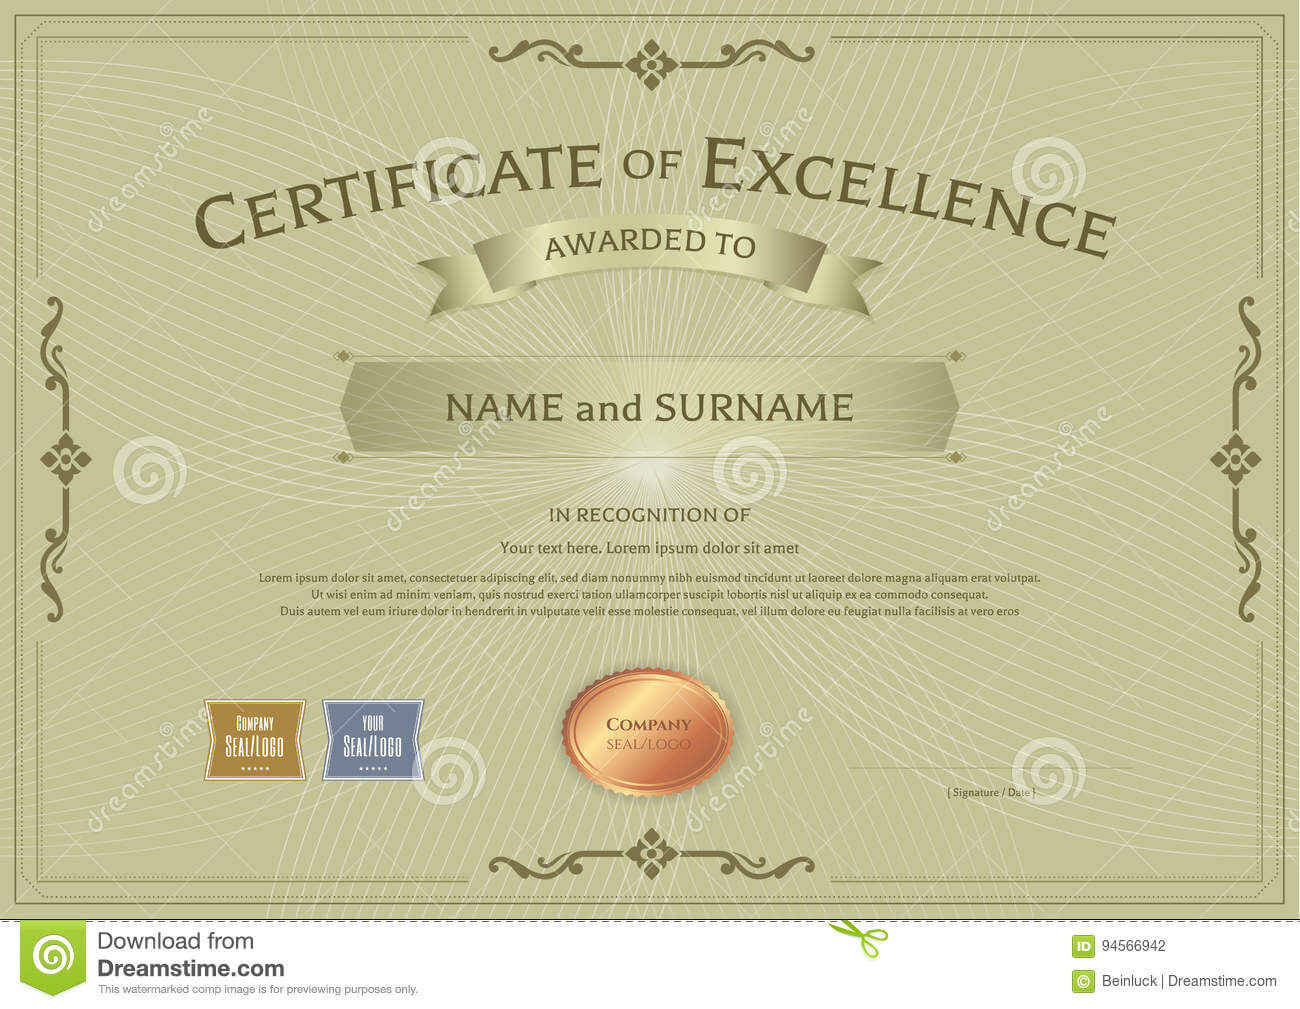 Certificate Of Excellence Template With Award Ribbon On With Award Of Excellence Certificate Template